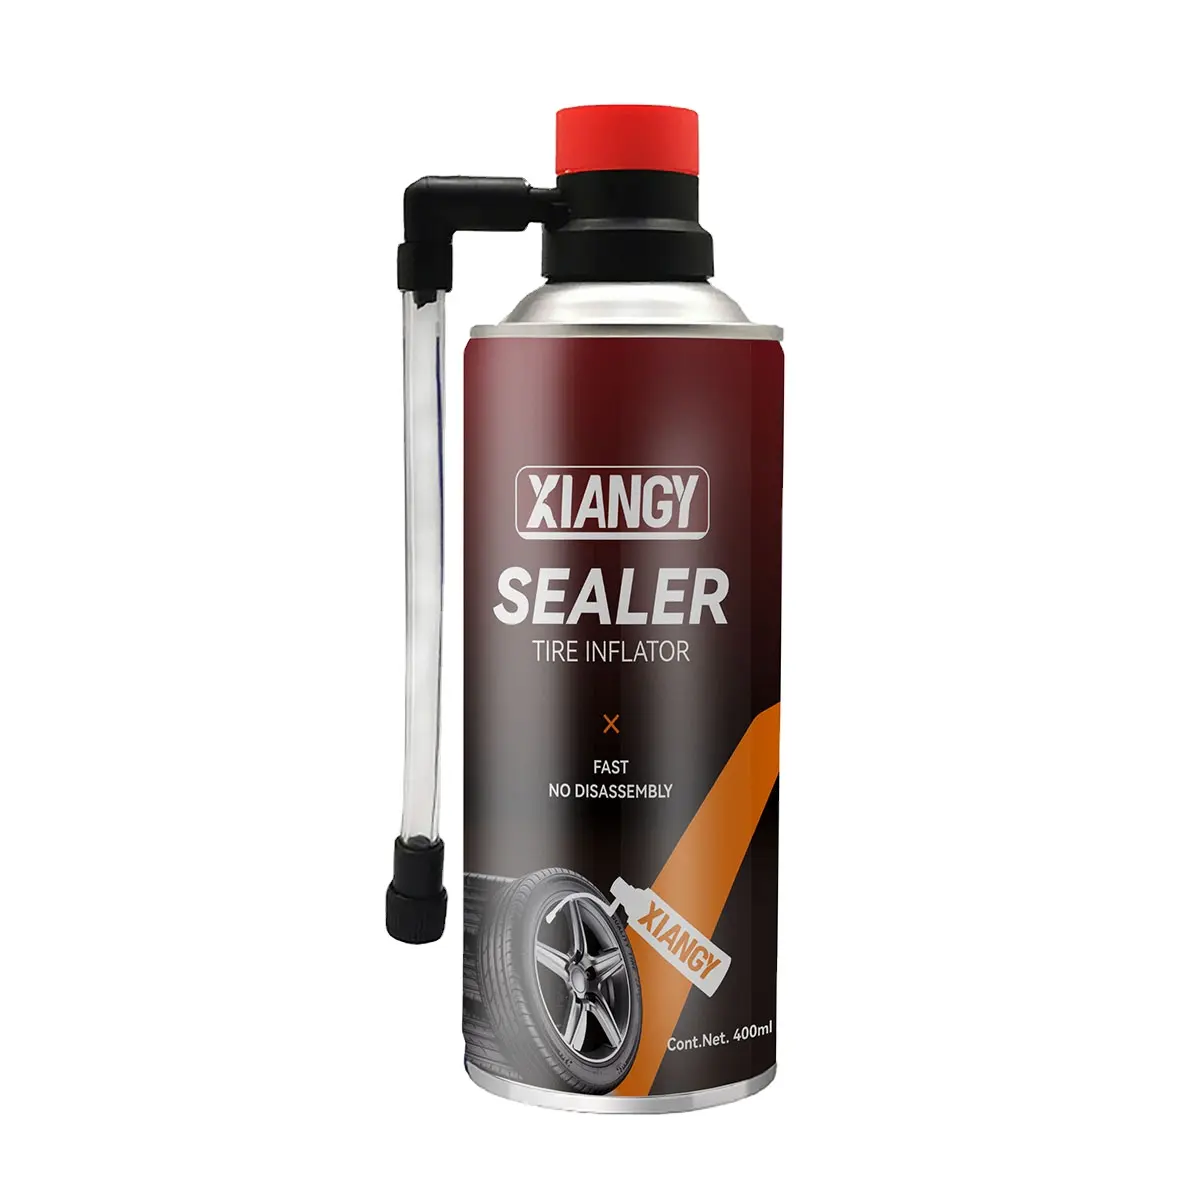 Xiangy Car Tire Puncture Repair Tire Sealer & Inflator